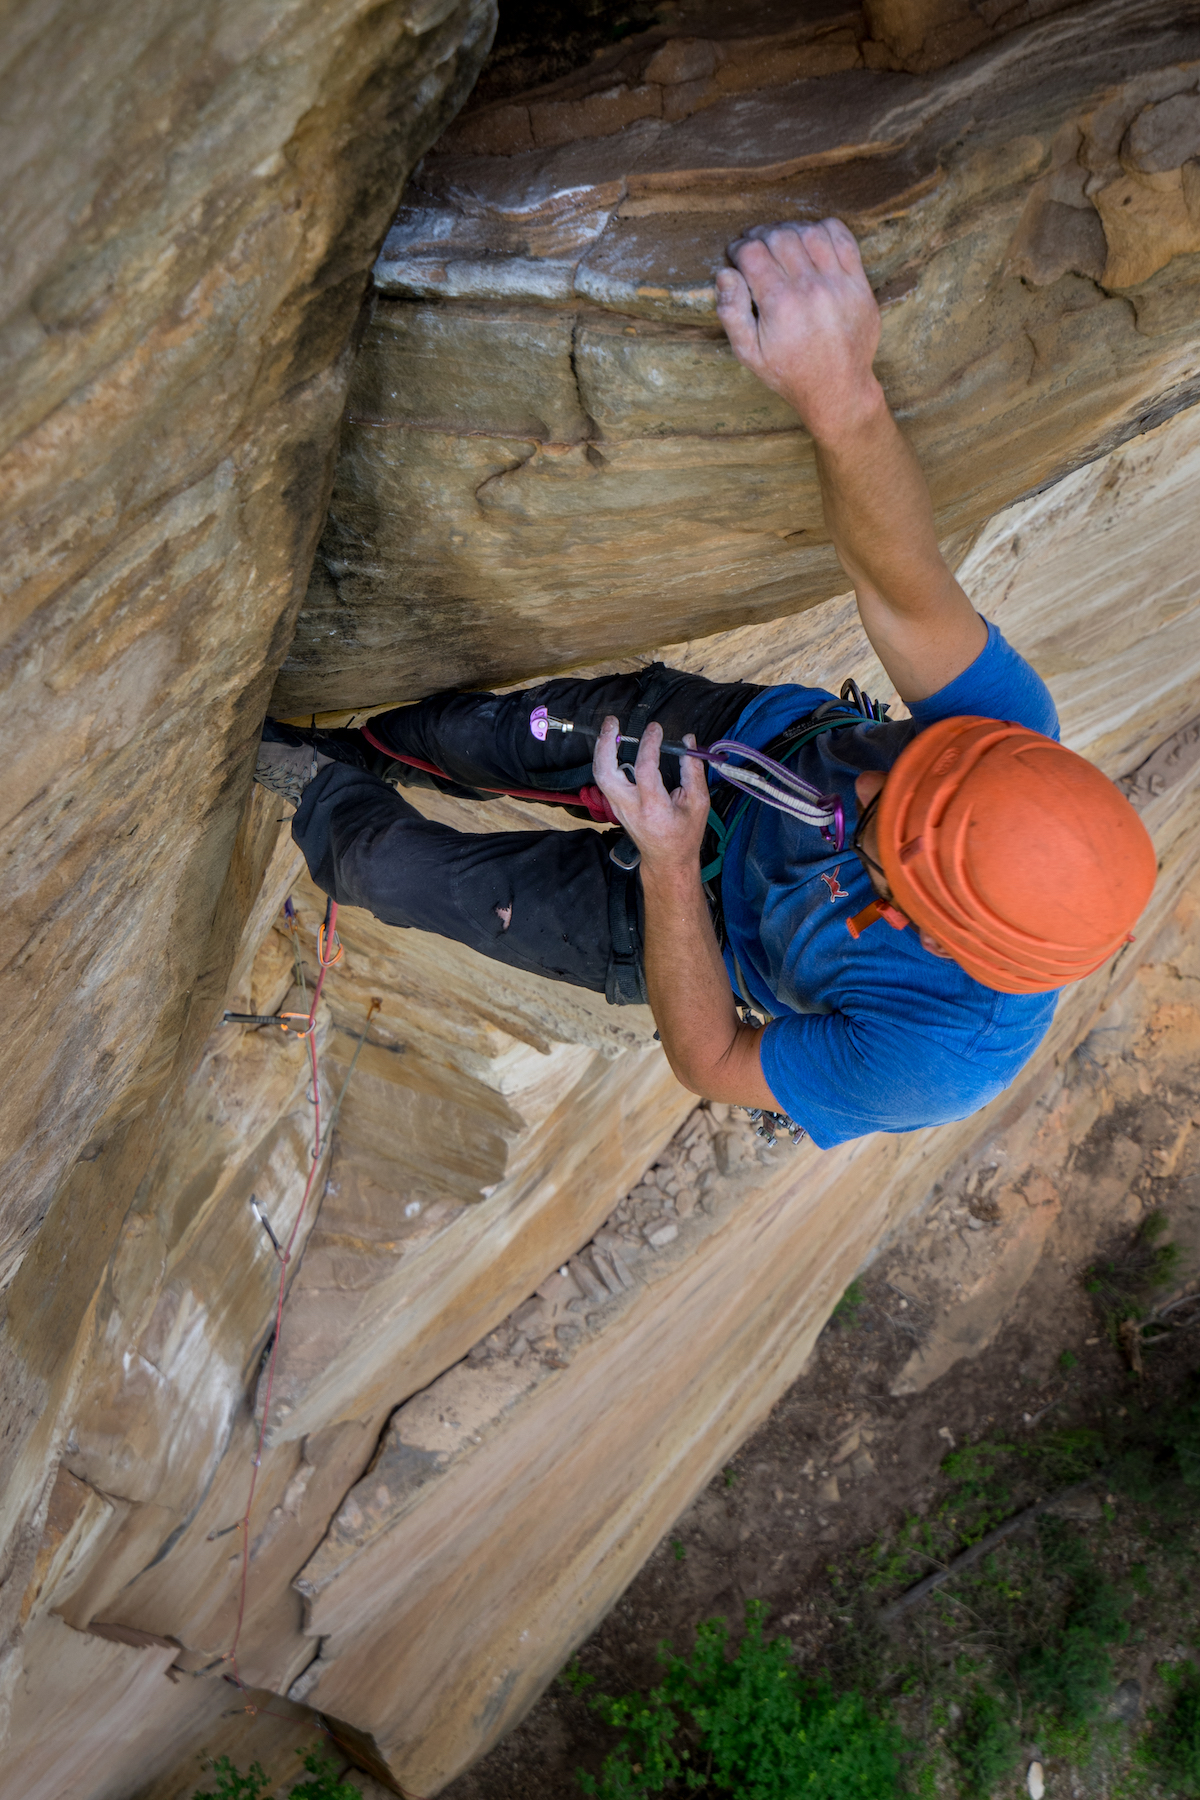 Chris Kalman placing a #6 (purple) DMM Dragonfly on a steep new route in Arizona. [Photo] Nelson Klein